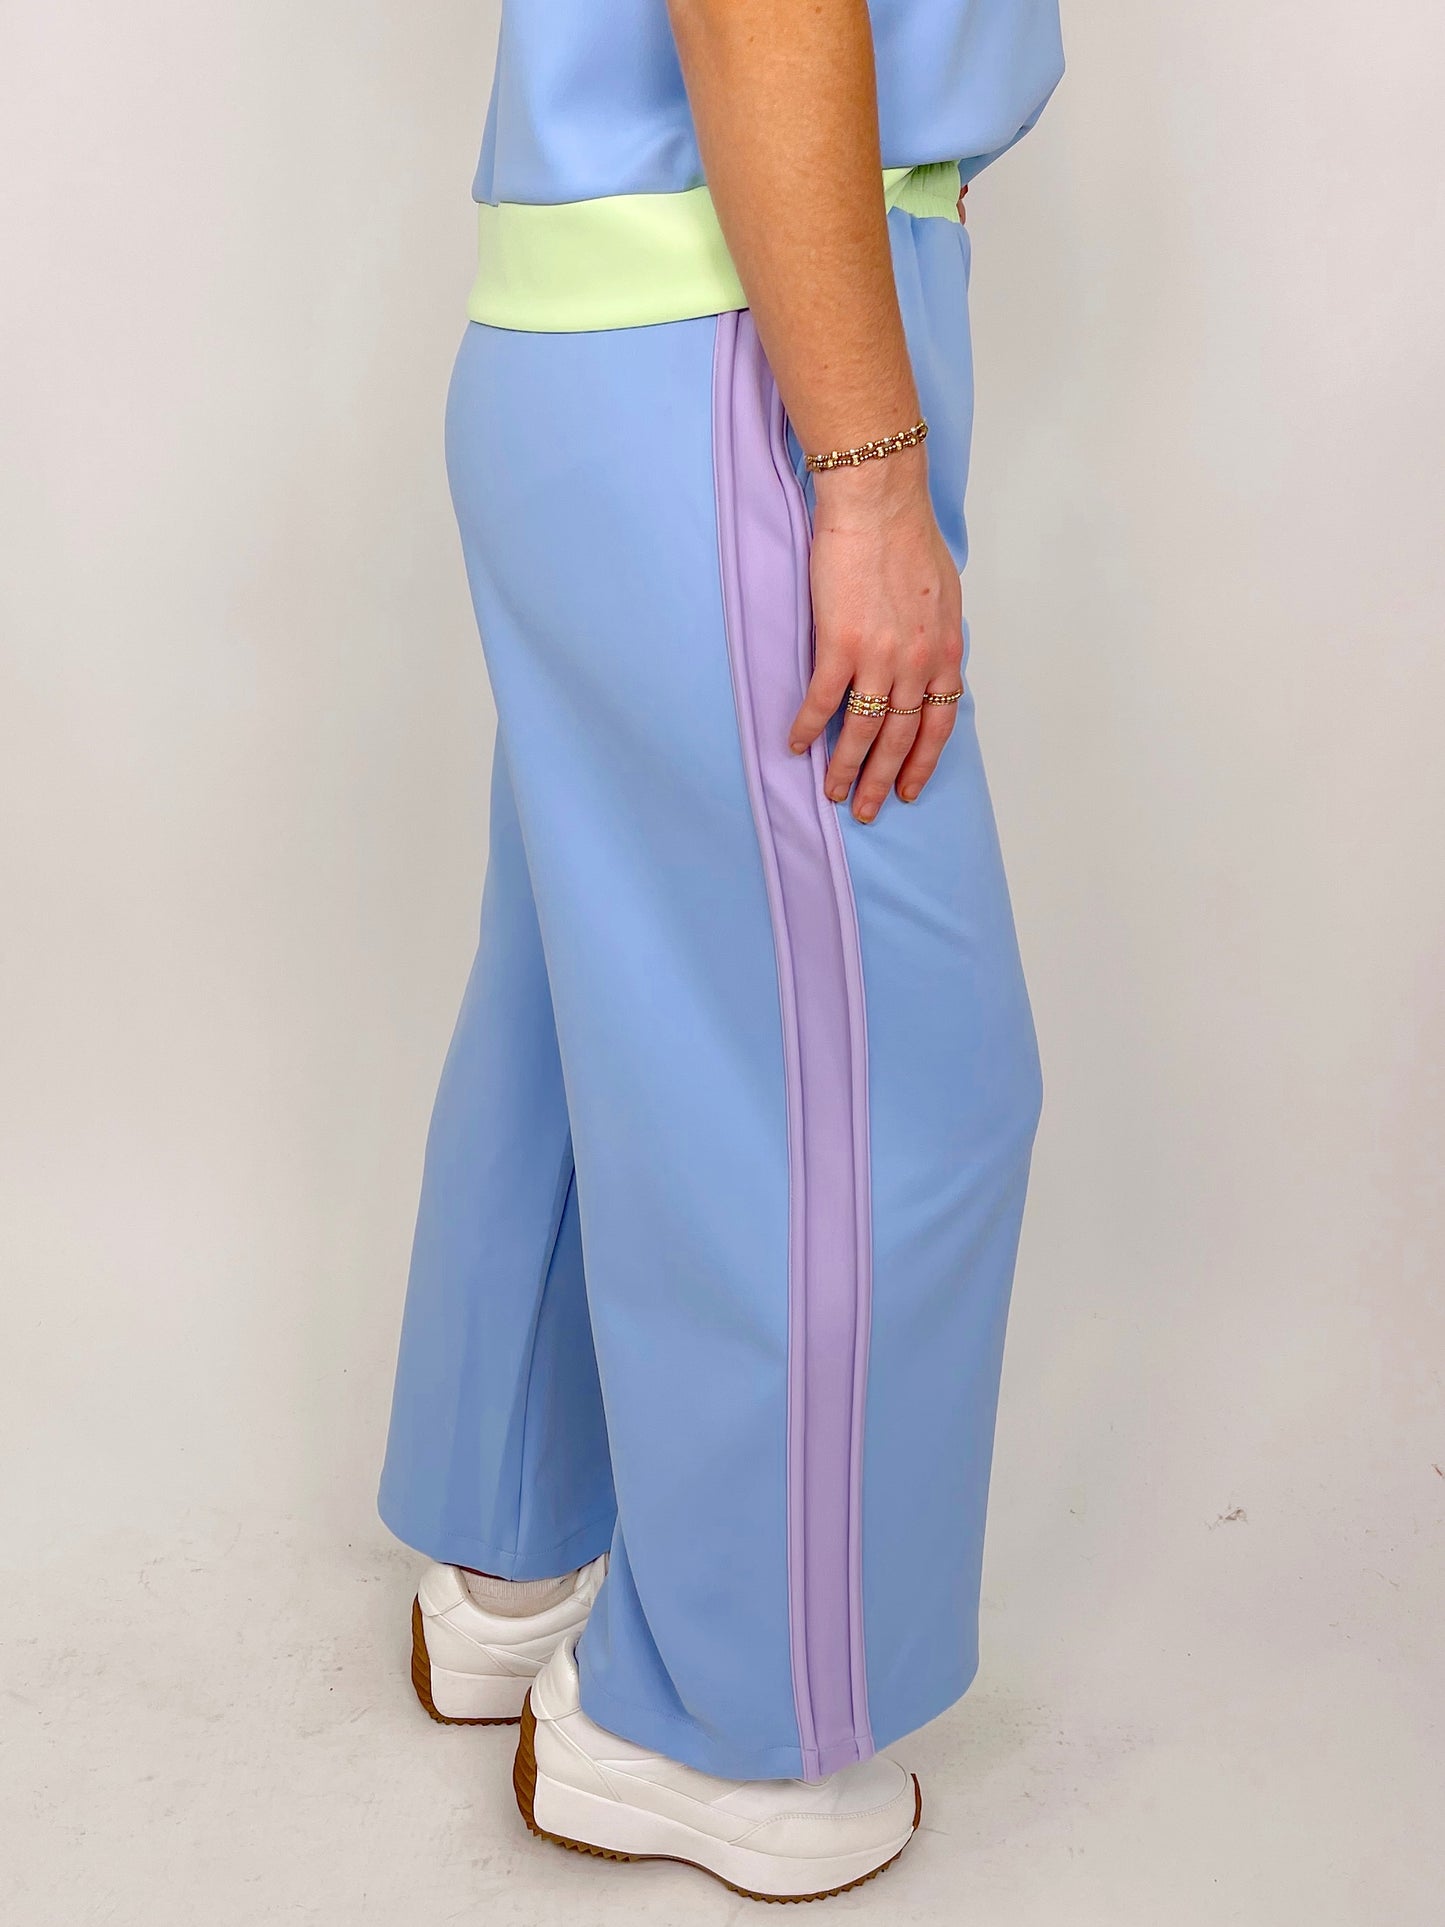 The Jolie Pant Set-Matching Set-Why Dress-The Village Shoppe, Women’s Fashion Boutique, Shop Online and In Store - Located in Muscle Shoals, AL.